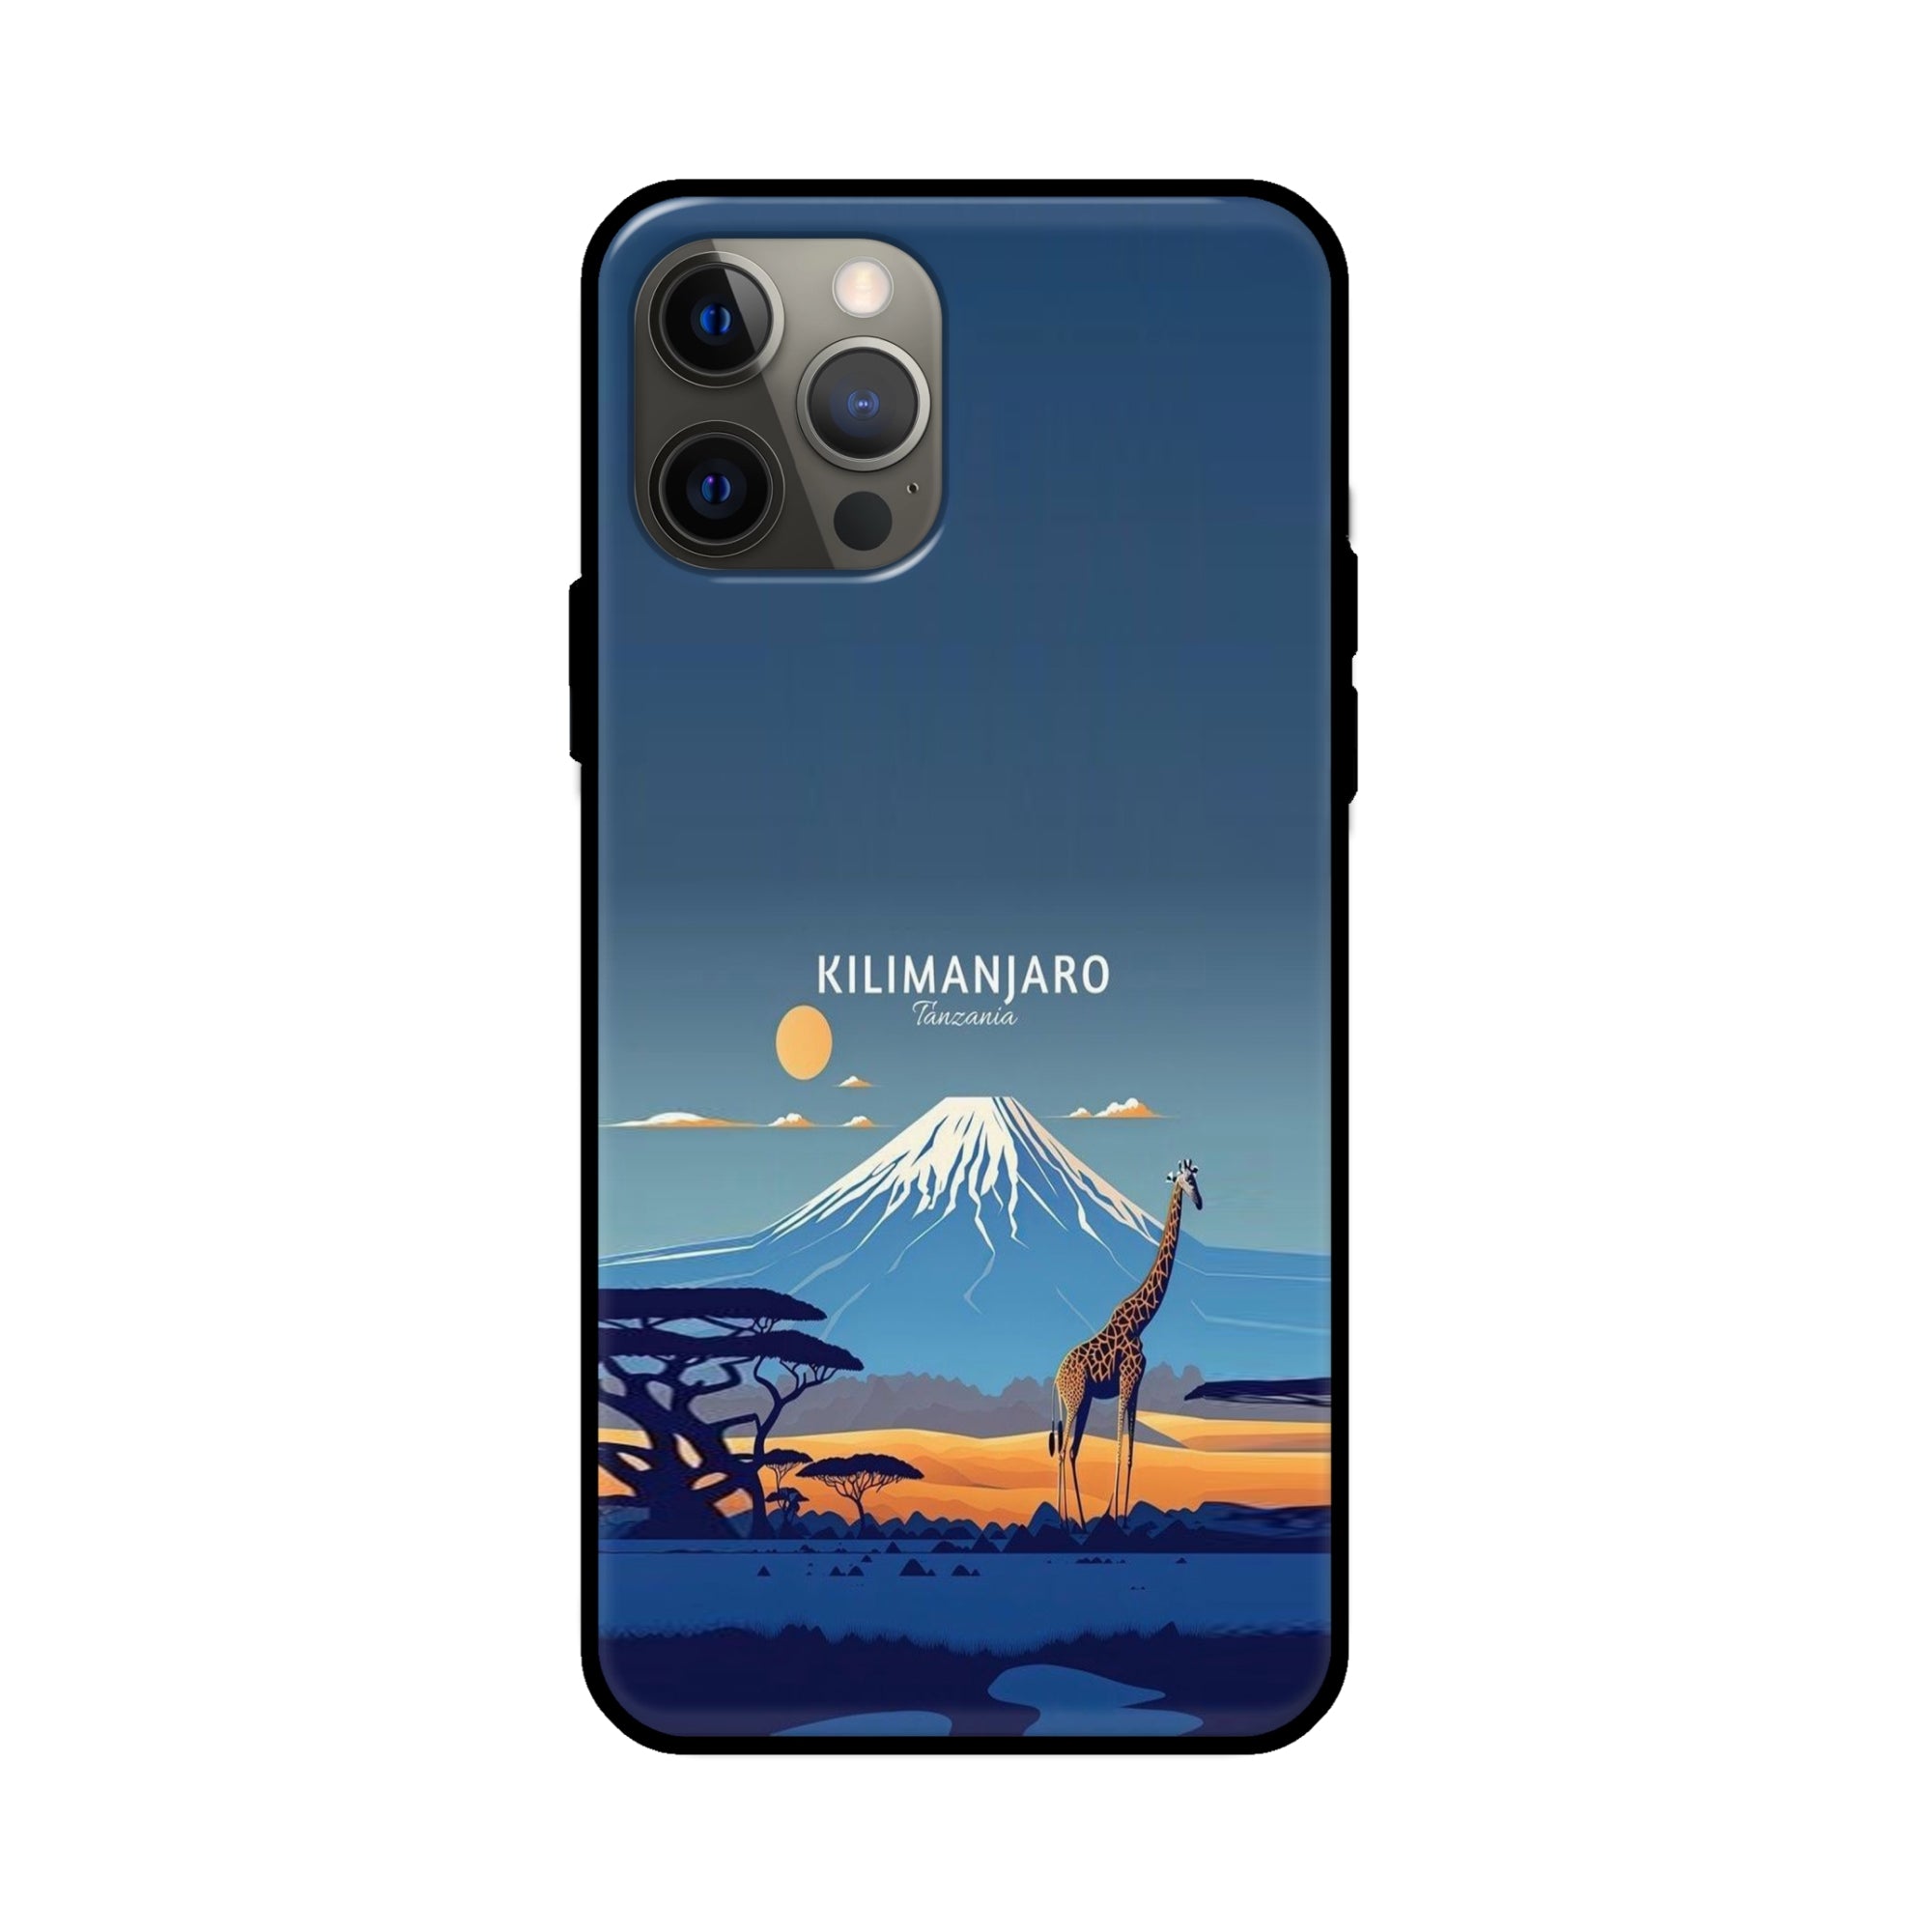 Buy Kilimanjaro Glass/Metal Back Mobile Phone Case/Cover For Apple iPhone 12 pro Online